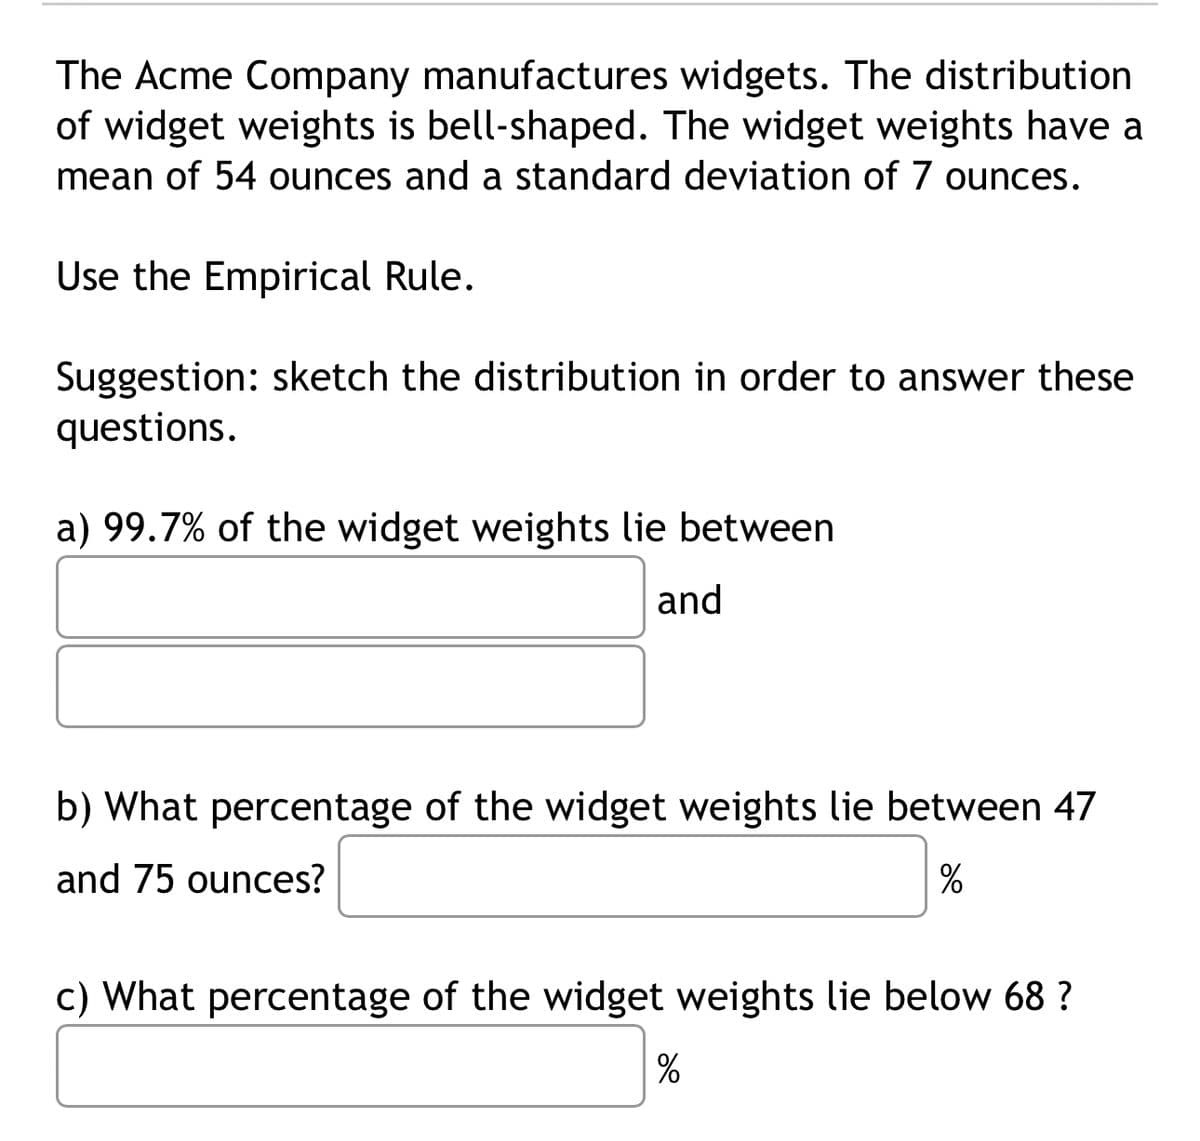 The Acme Company manufactures widgets. The distribution
of widget weights is bell-shaped. The widget weights have a
mean of 54 ounces and a standard deviation of 7 ounces.
Use the Empirical Rule.
Suggestion: sketch the distribution in order to answer these
questions.
a) 99.7% of the widget weights lie between
and
b) What percentage of the widget weights lie between 47
and 75 ounces?
%
c) What percentage of the widget weights lie below 68 ?
%
20